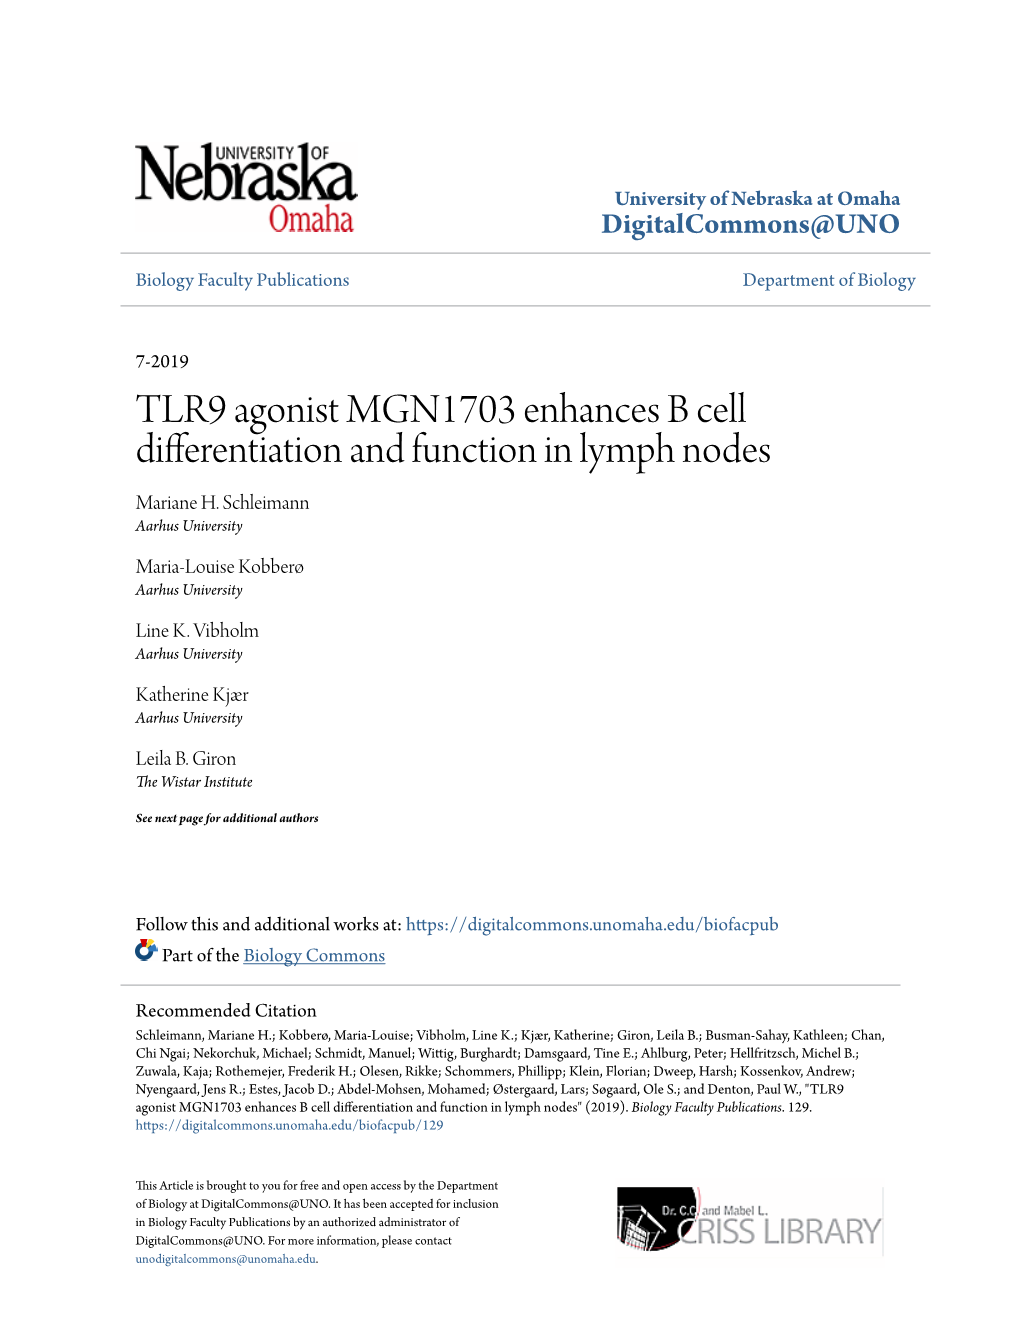 TLR9 Agonist MGN1703 Enhances B Cell Differentiation and Function in Lymph Nodes Mariane H